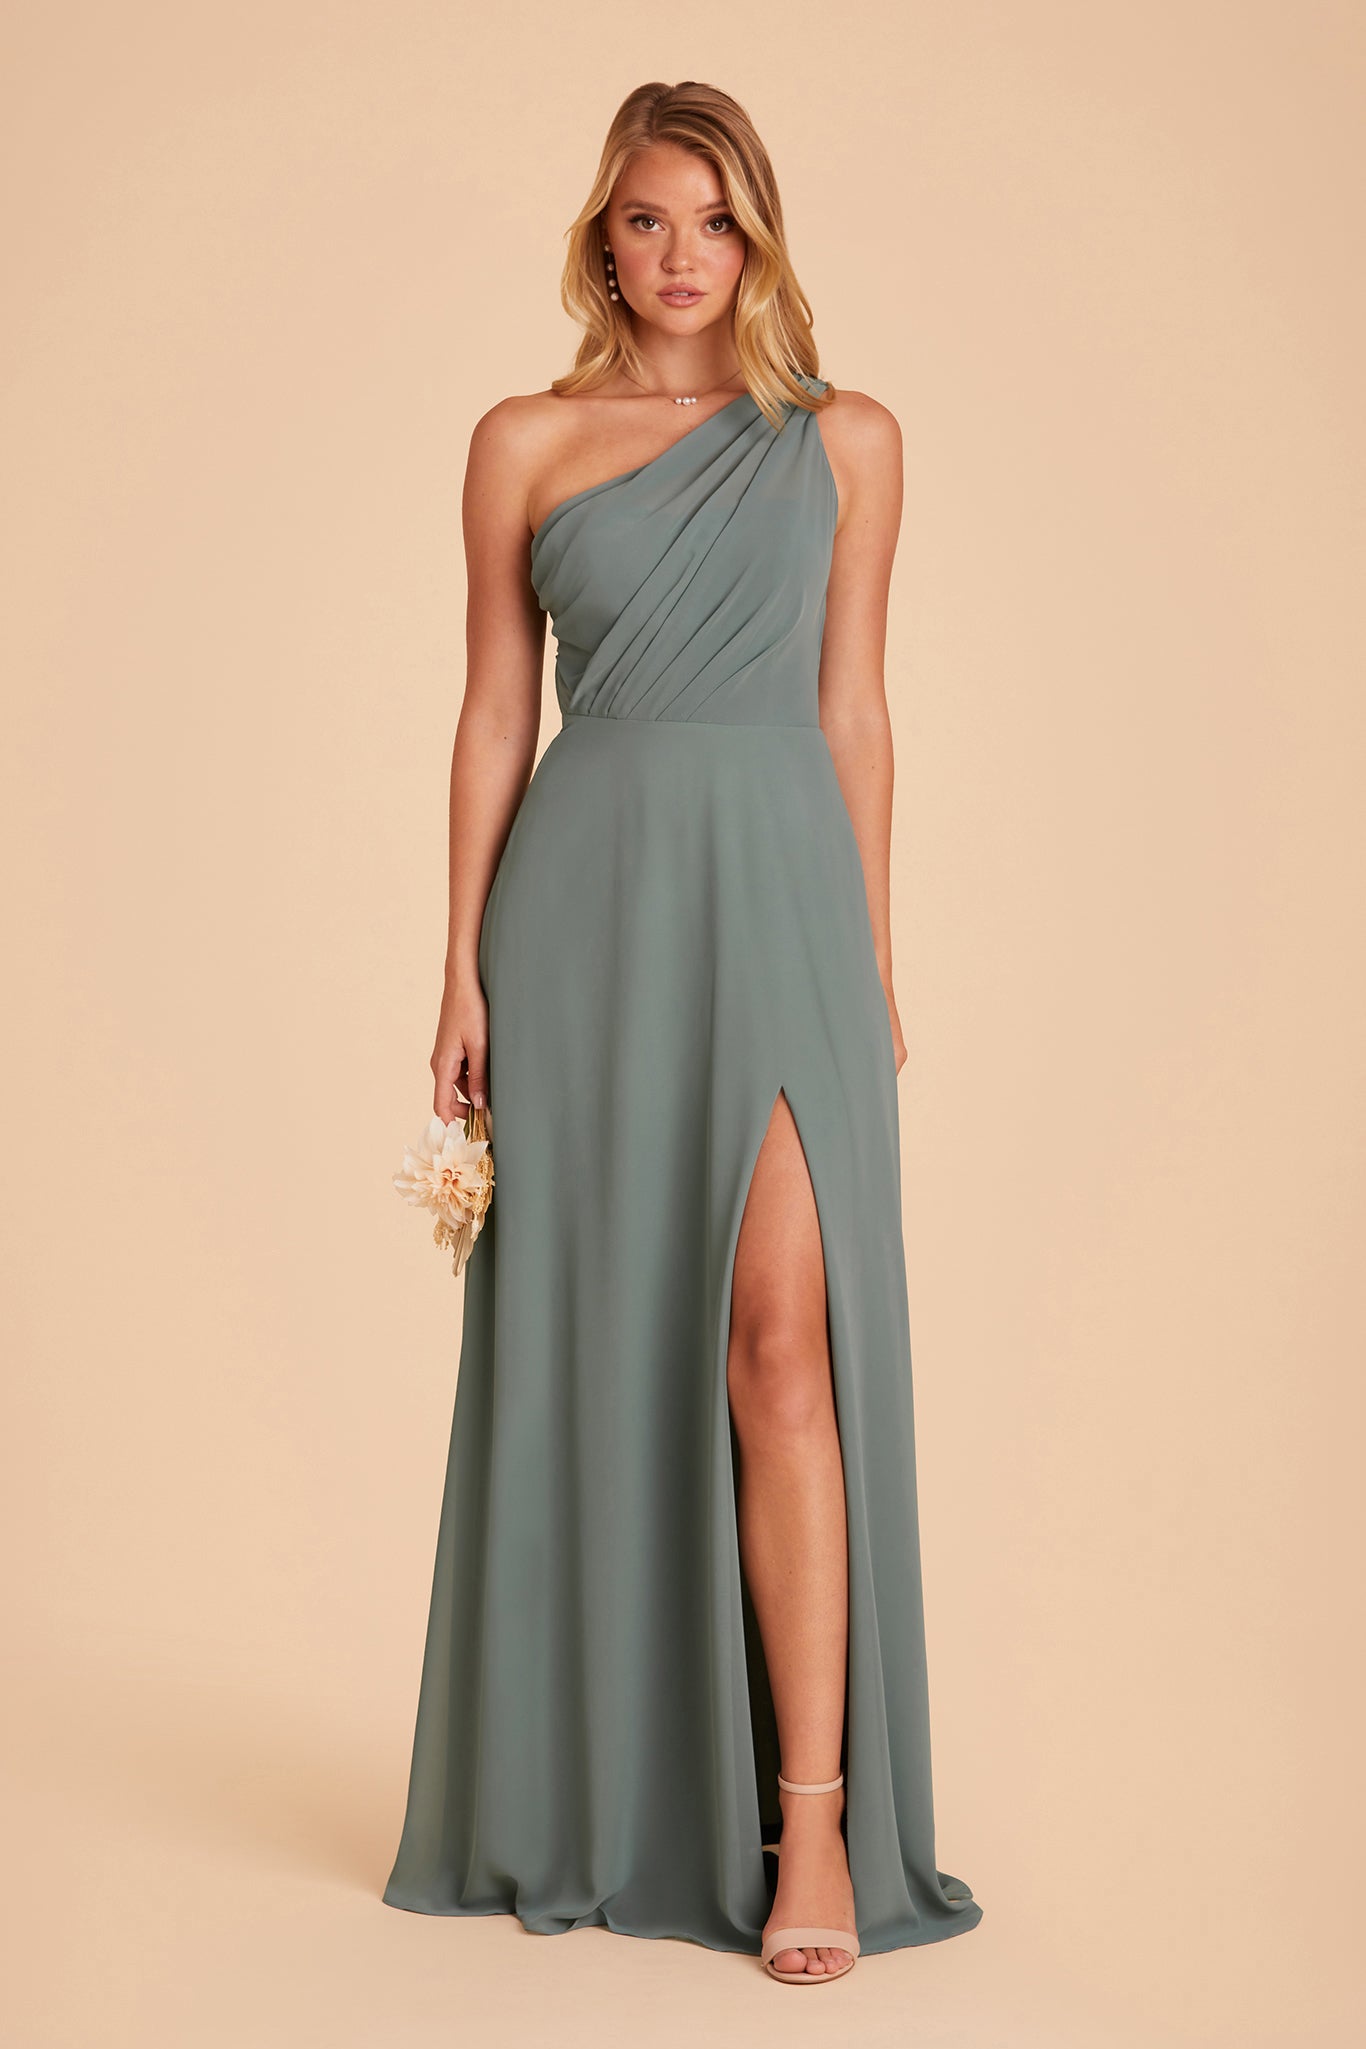 Front view of the Kira Dress in sea glass chiffon with the optional slit shows a slender model with a light skin tone with their left leg and foot revealed through a mid-thigh dress slit. They wear Natalie Chunky Heel shoes in nude blush. 